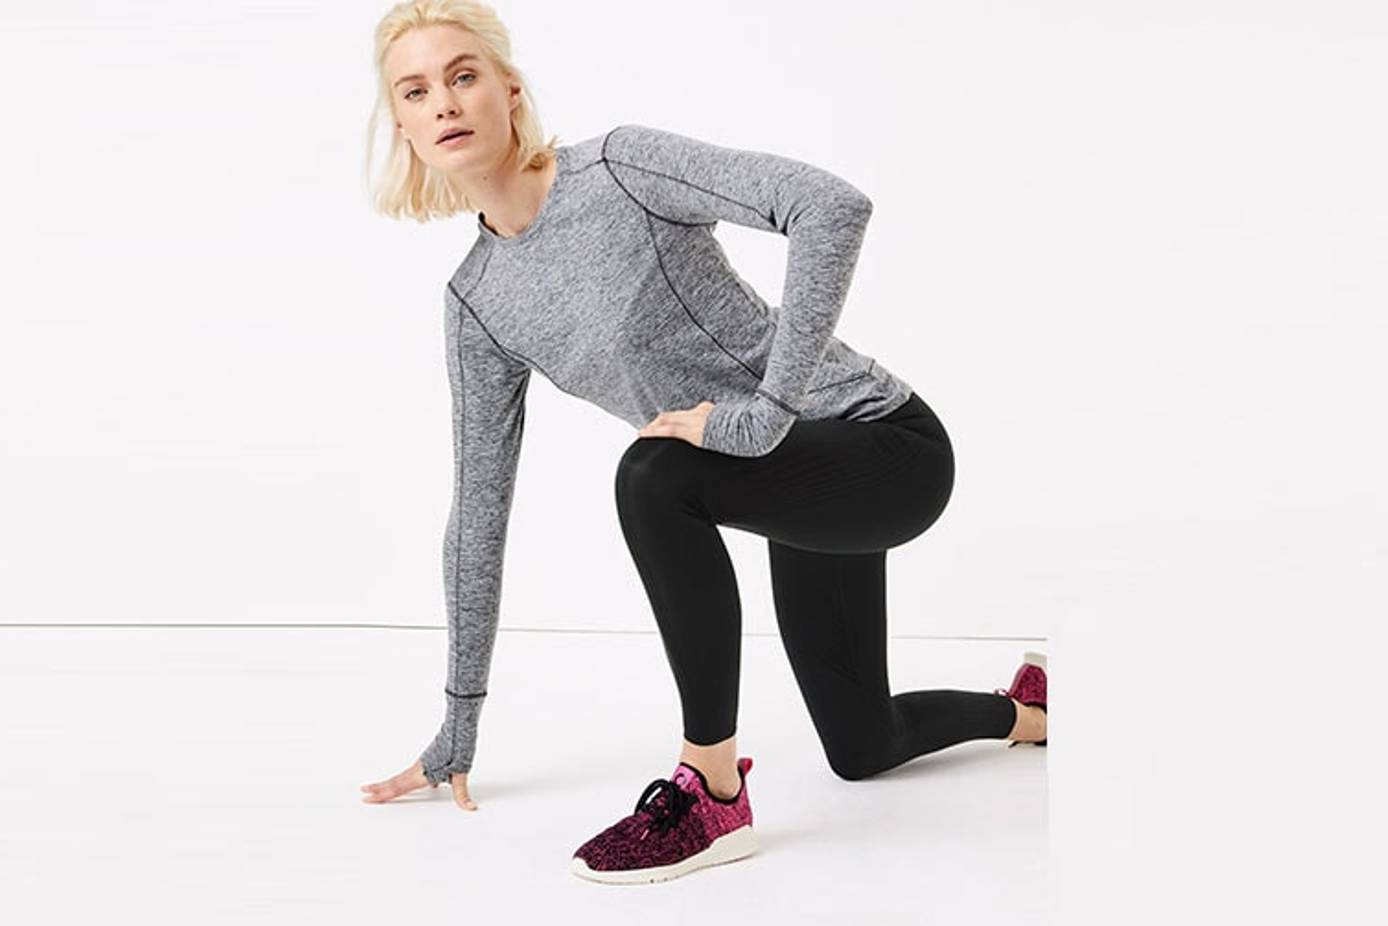 Introducing M&S Goodmove, our new activewear collection. Made for